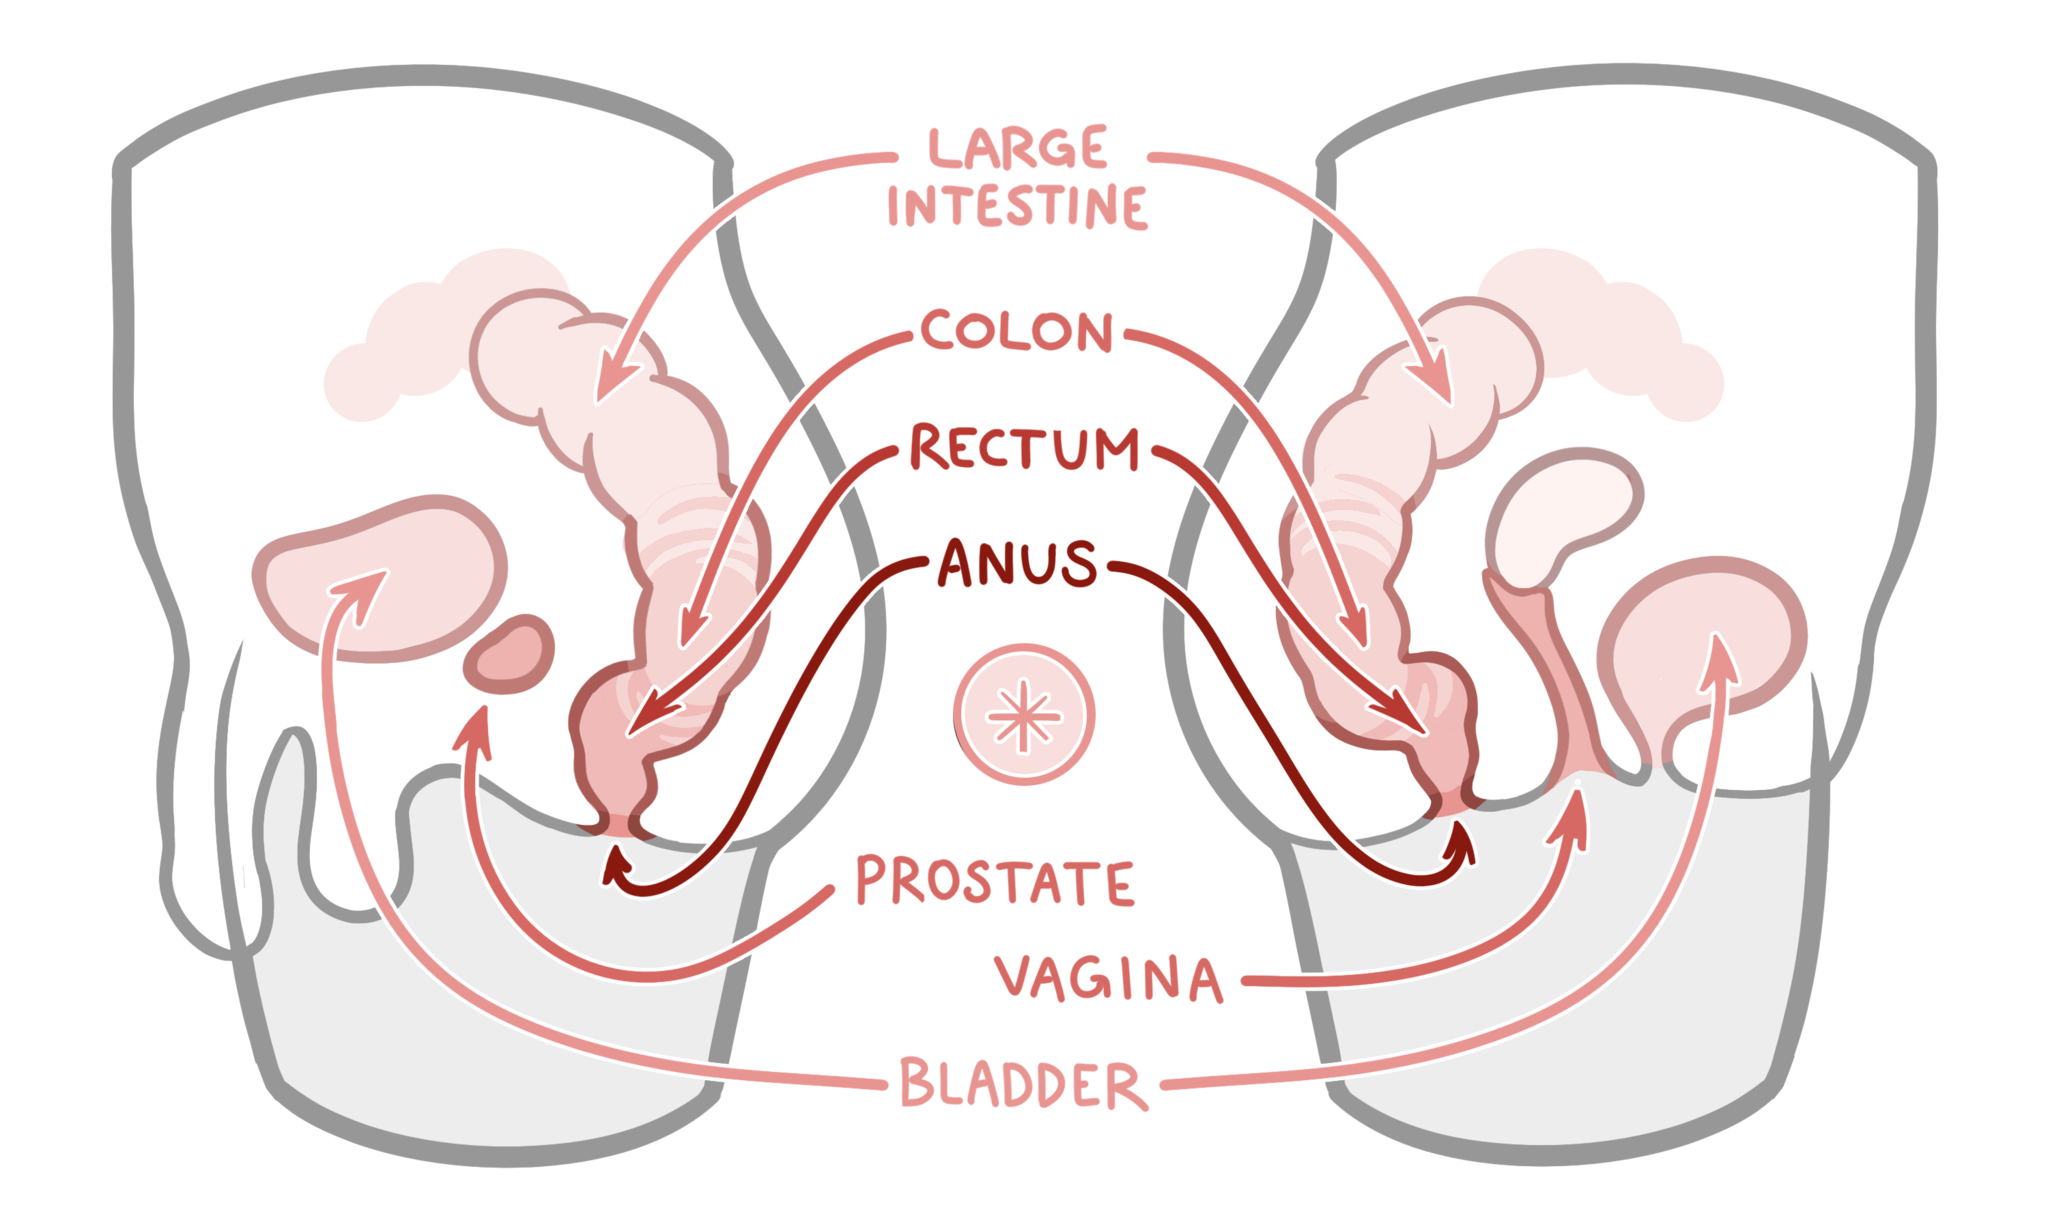 Elbow Fisting Diagram - An In-Depth Guide to Anal Training, Stretching & Gaping